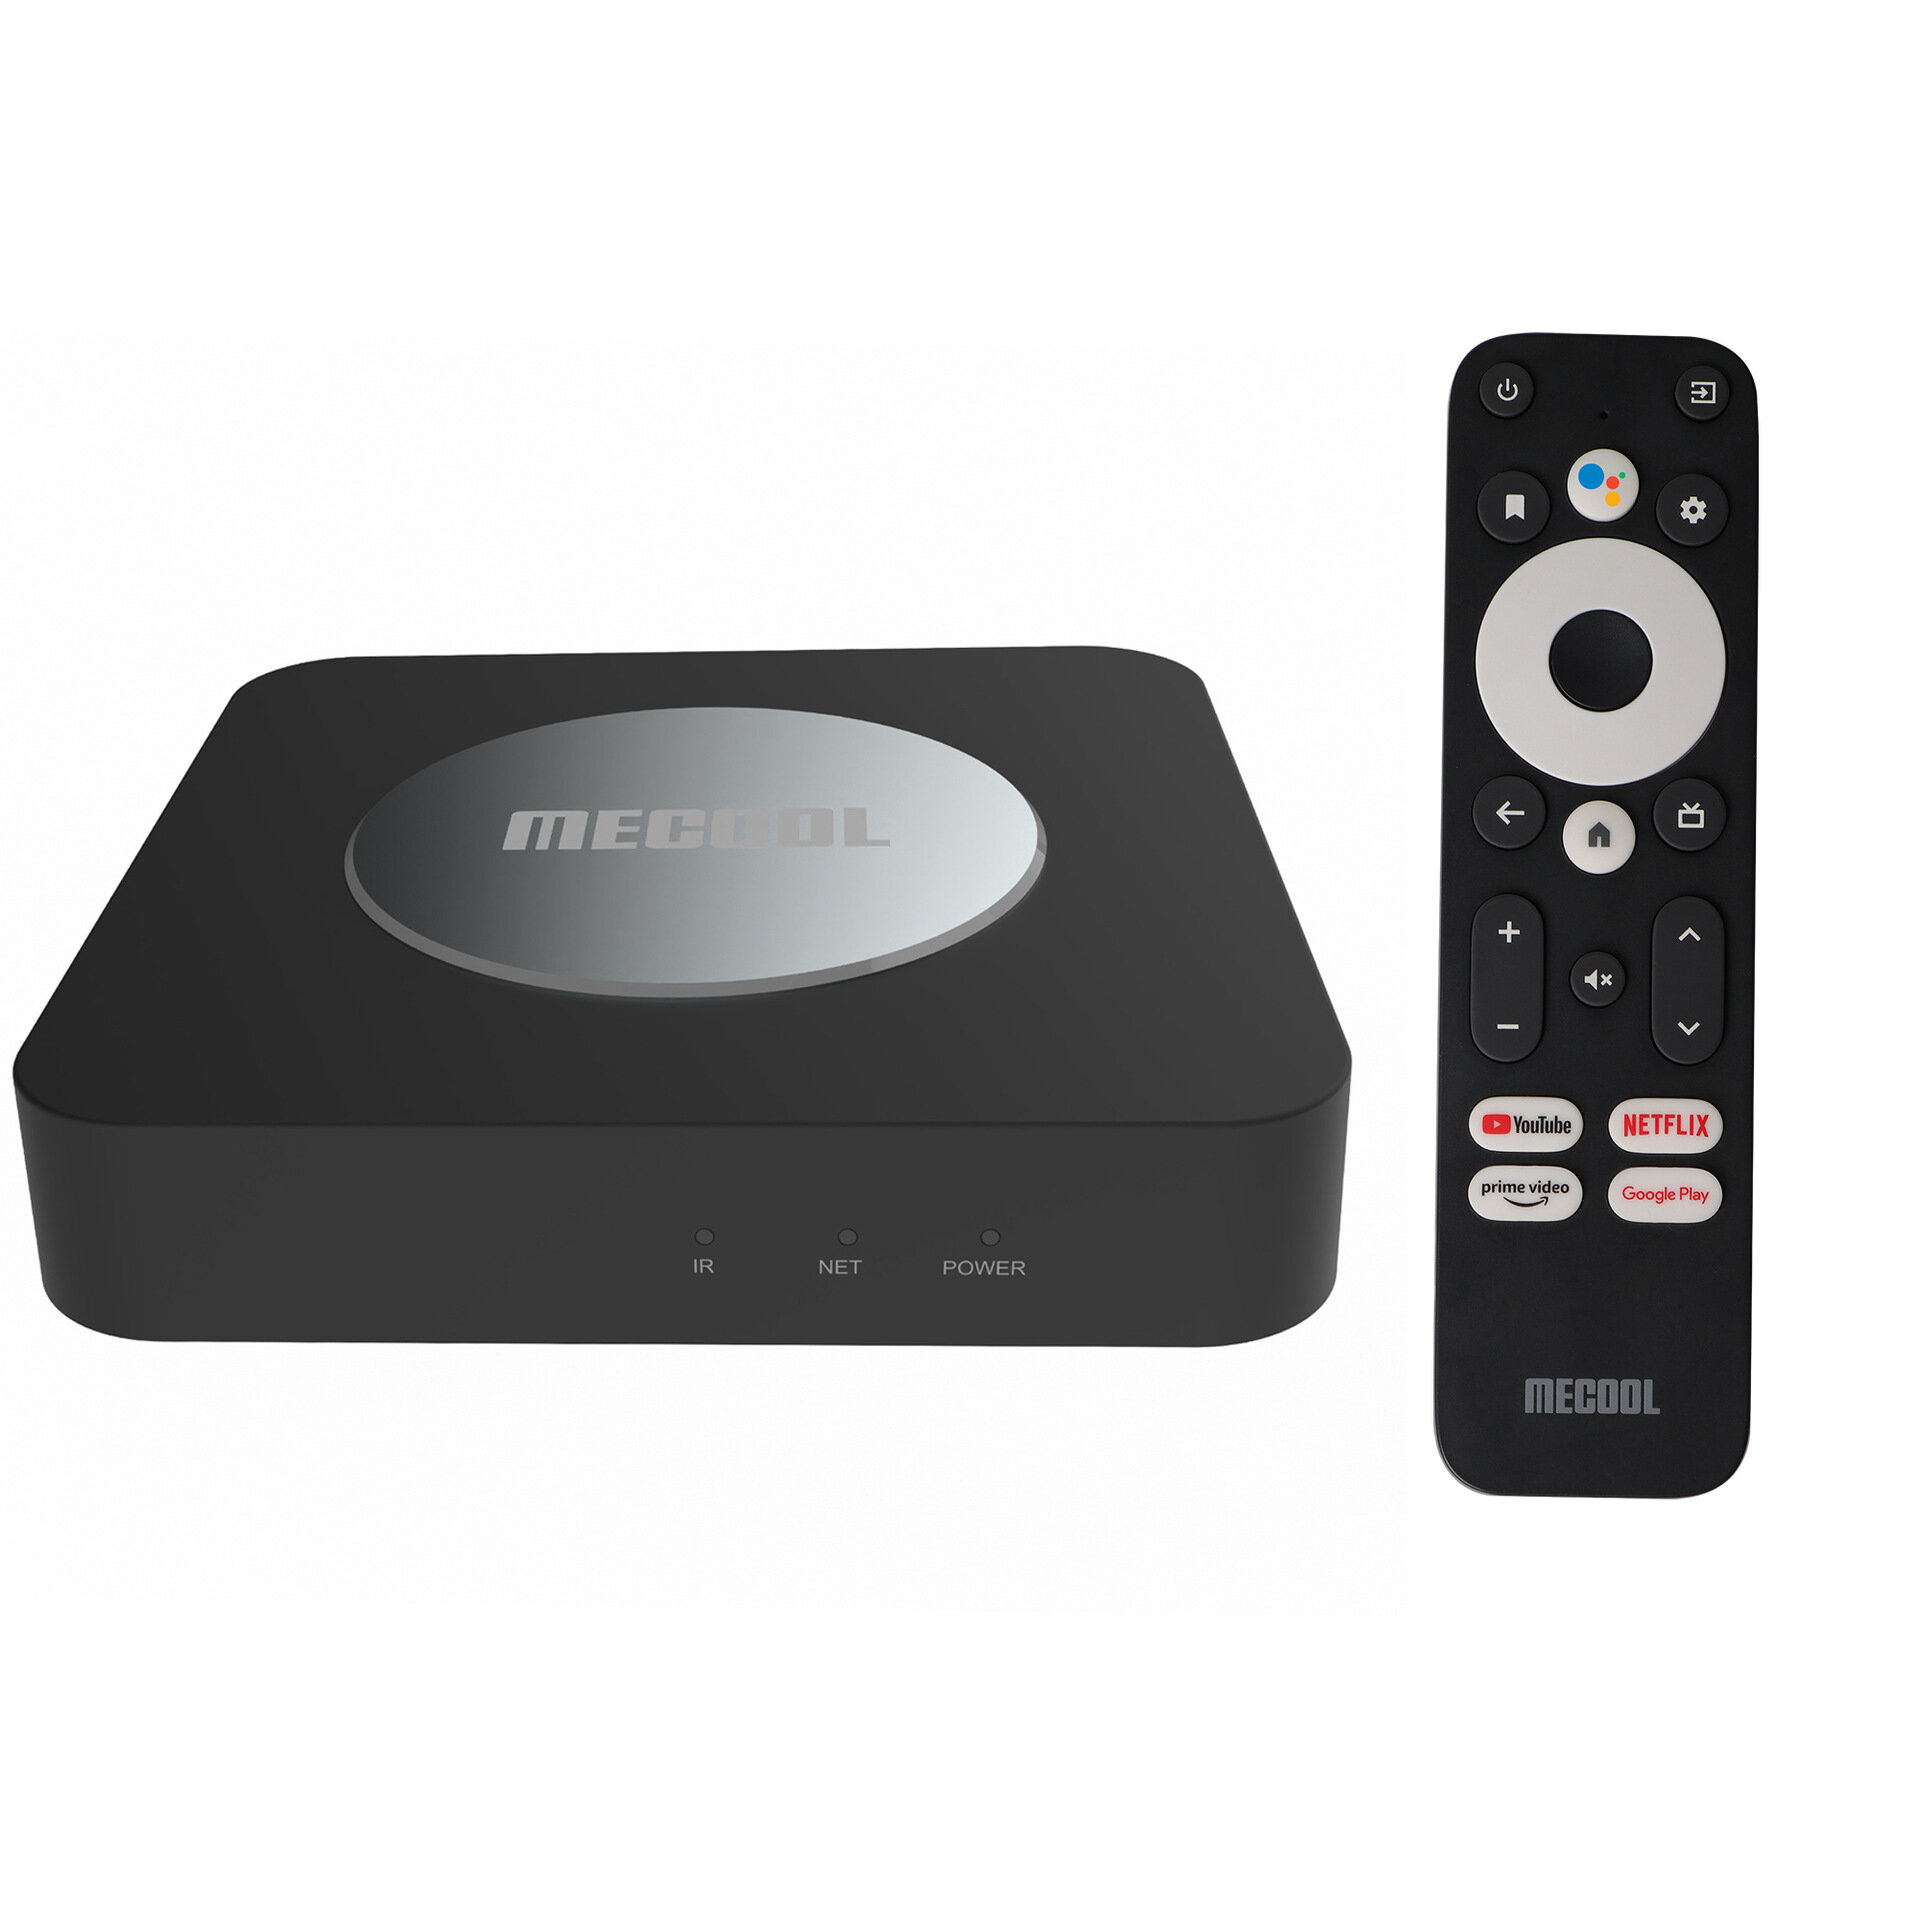 MECOOL KM2 Plus Android 11 TV Box S905X4 2+16GB Dual-5G-WIFI Google Play Assistant Authentication Netdlix 4K Movie COD